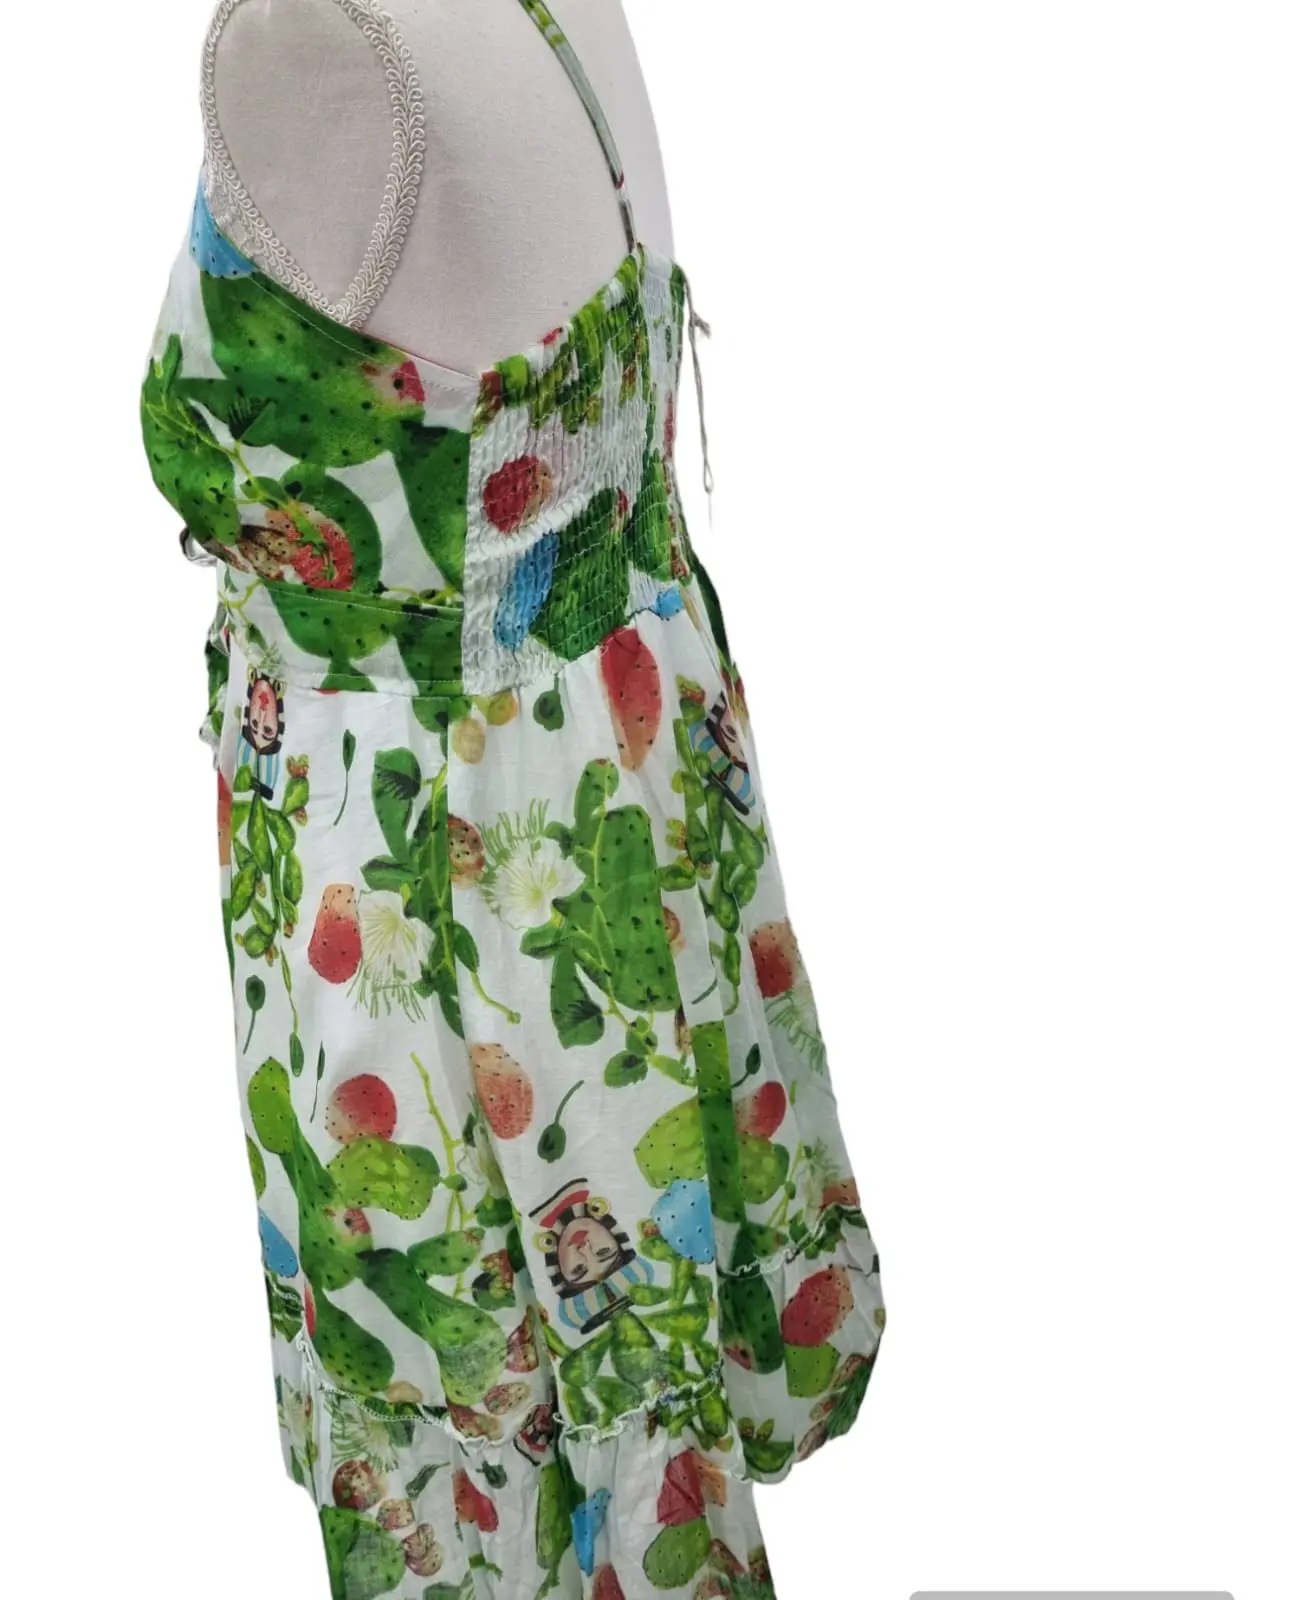 Short dress 100% cotton with adjustable straps, elasticated back. One size fits all. Prickly pear pattern